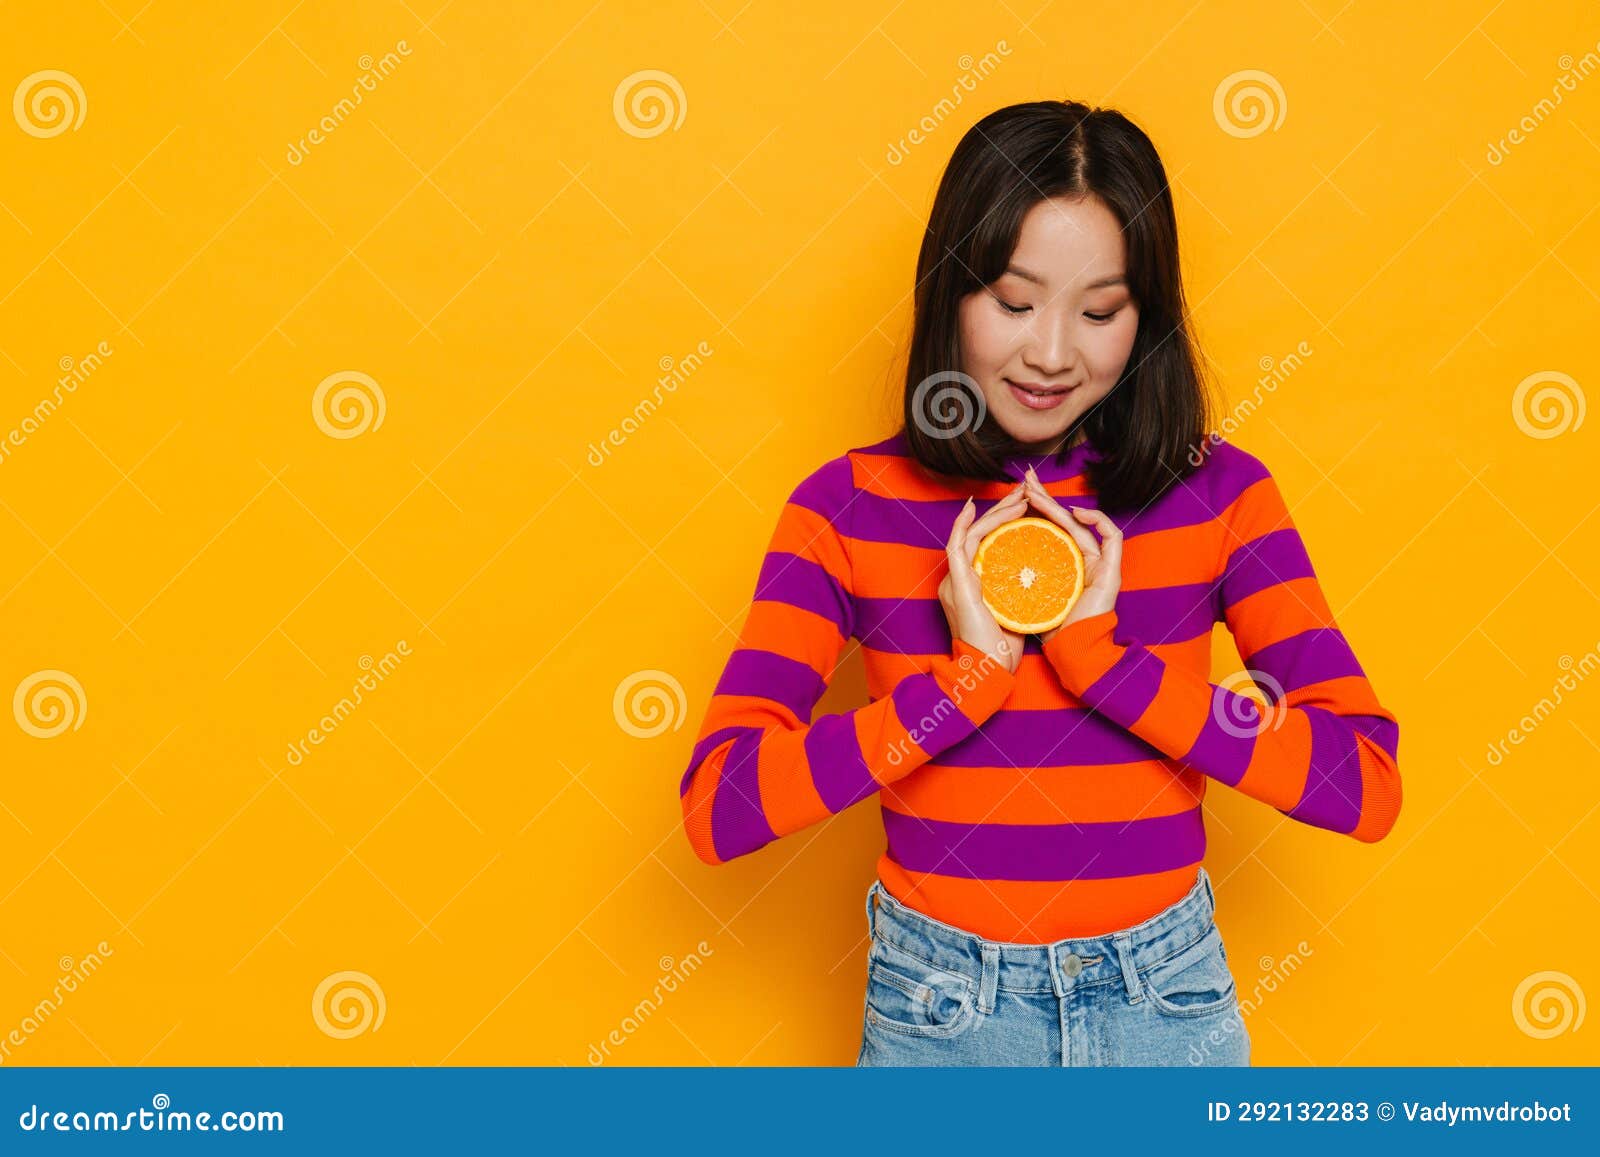 Asian Girl Posing With Sliced Orange While Standing Over Isolated Stock Image Image Of Asian 